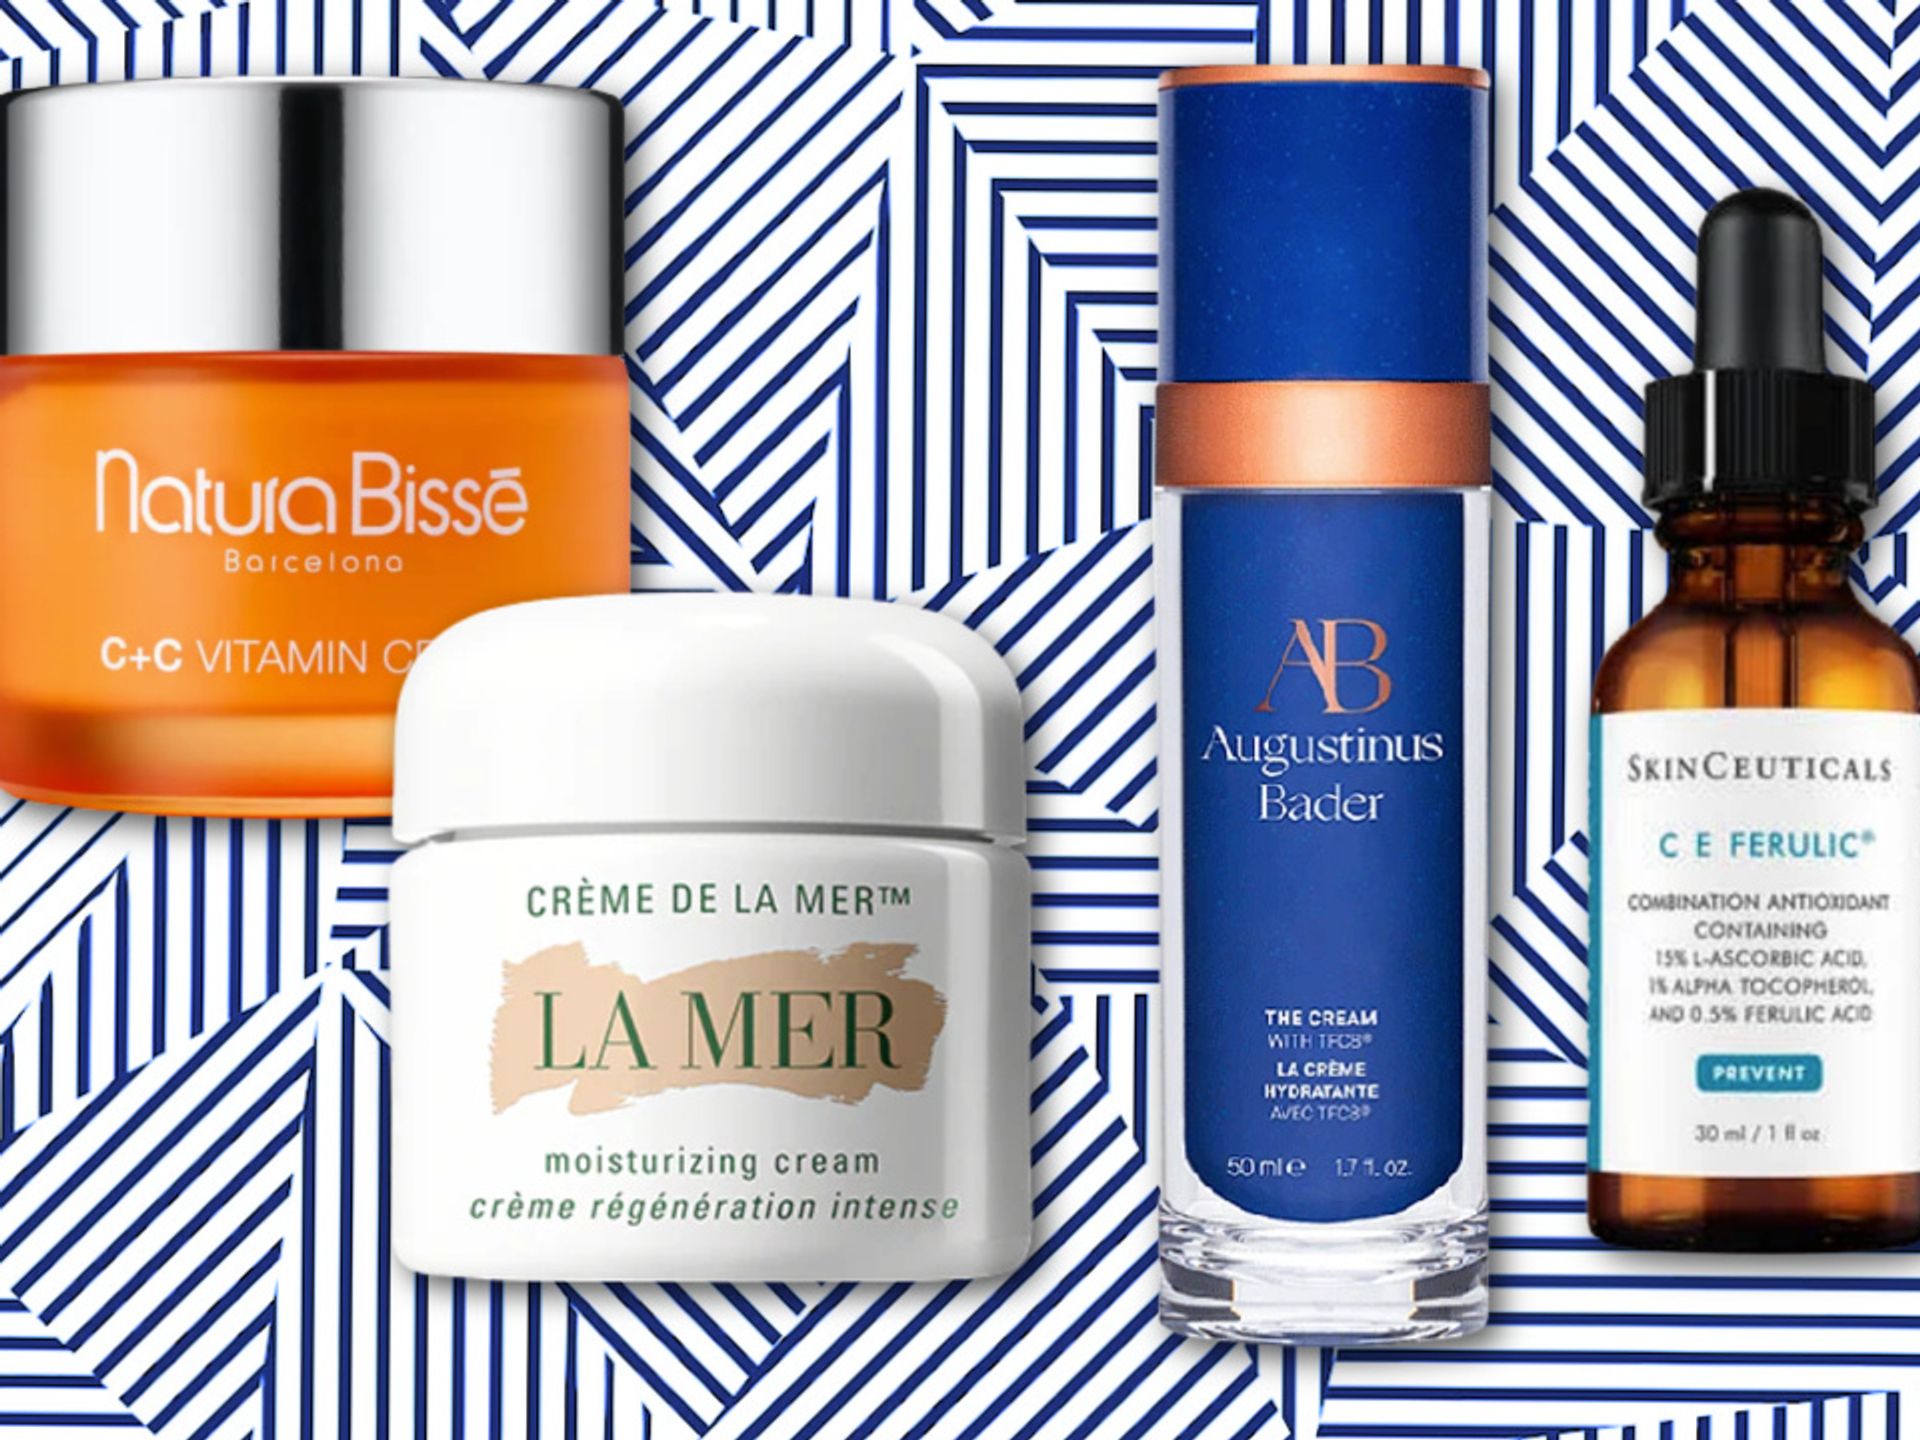 9 best luxury skincare brands & products that are worth the money